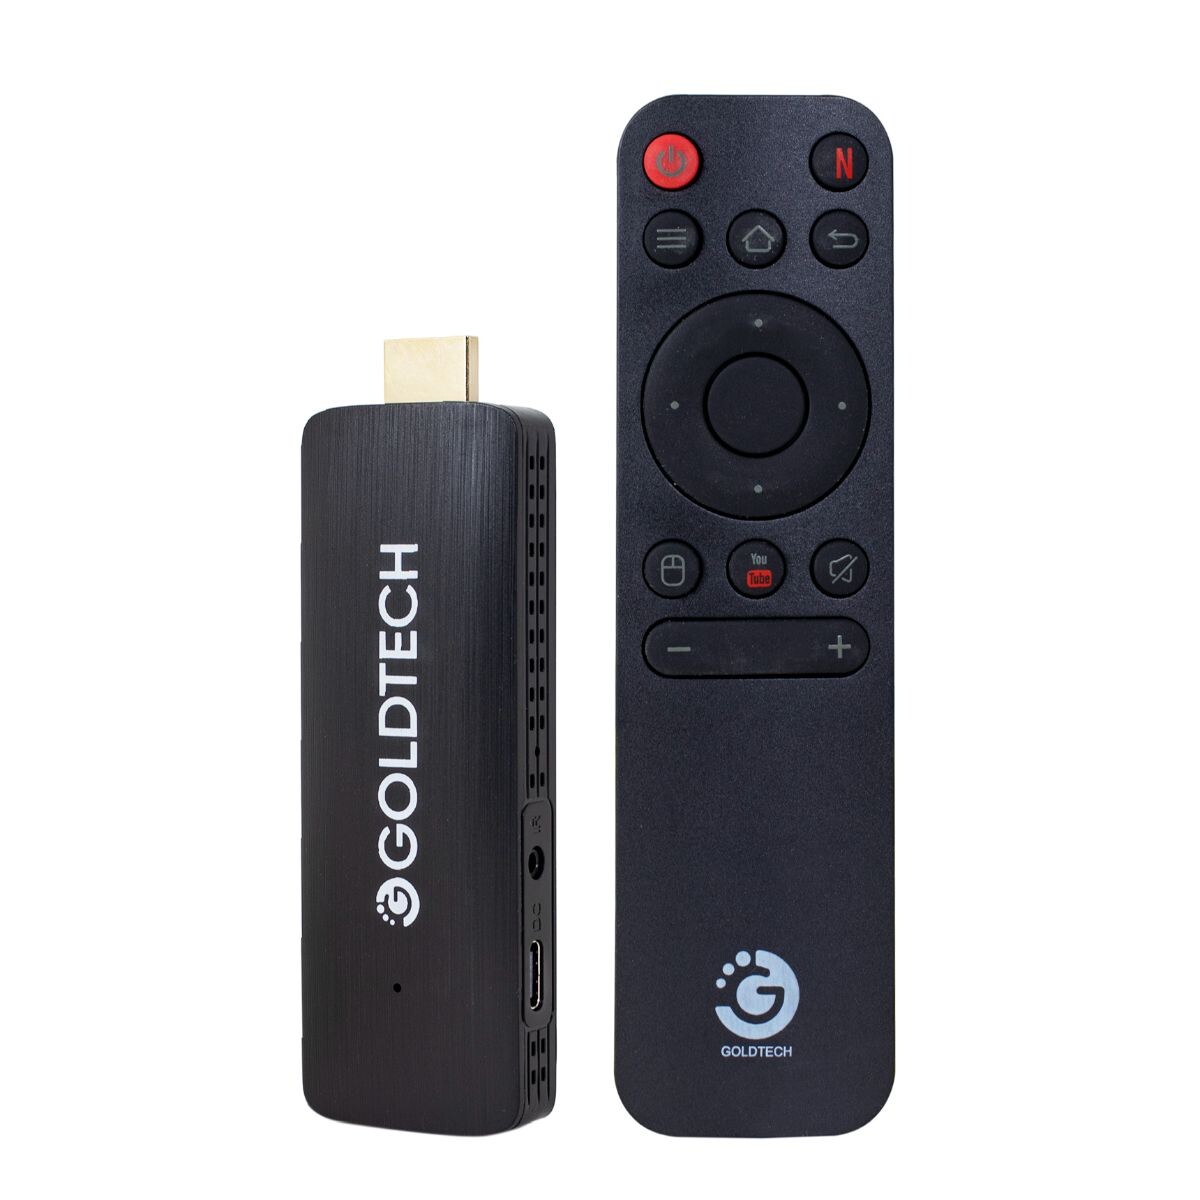 Tv Box Goldtech Gstick 16/2gb Android 10 